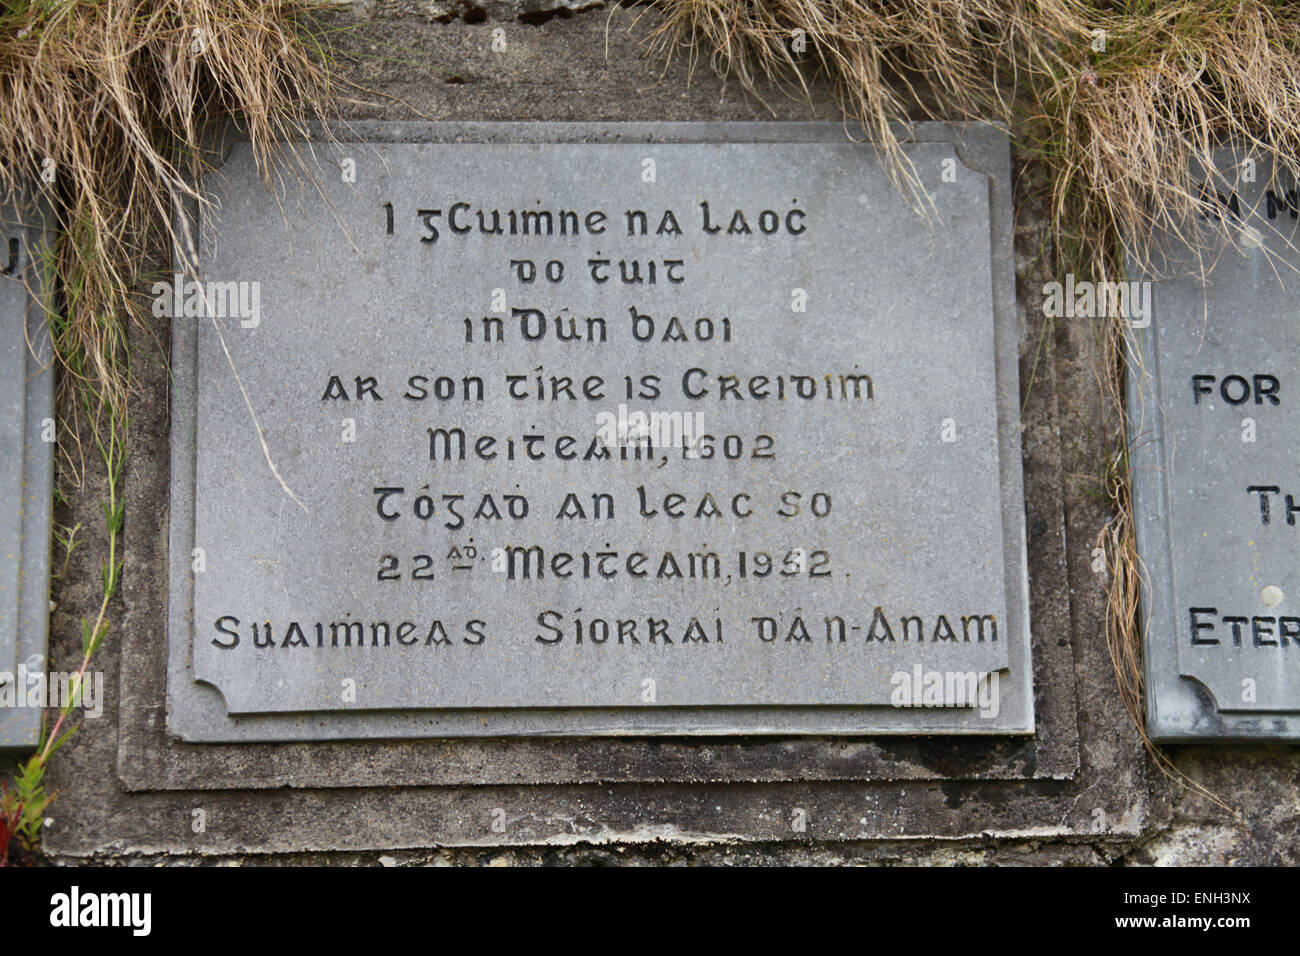 Information plaque at the ruins of Dunboy Castle on the Beara Peninsula in County Cork Stock Photo